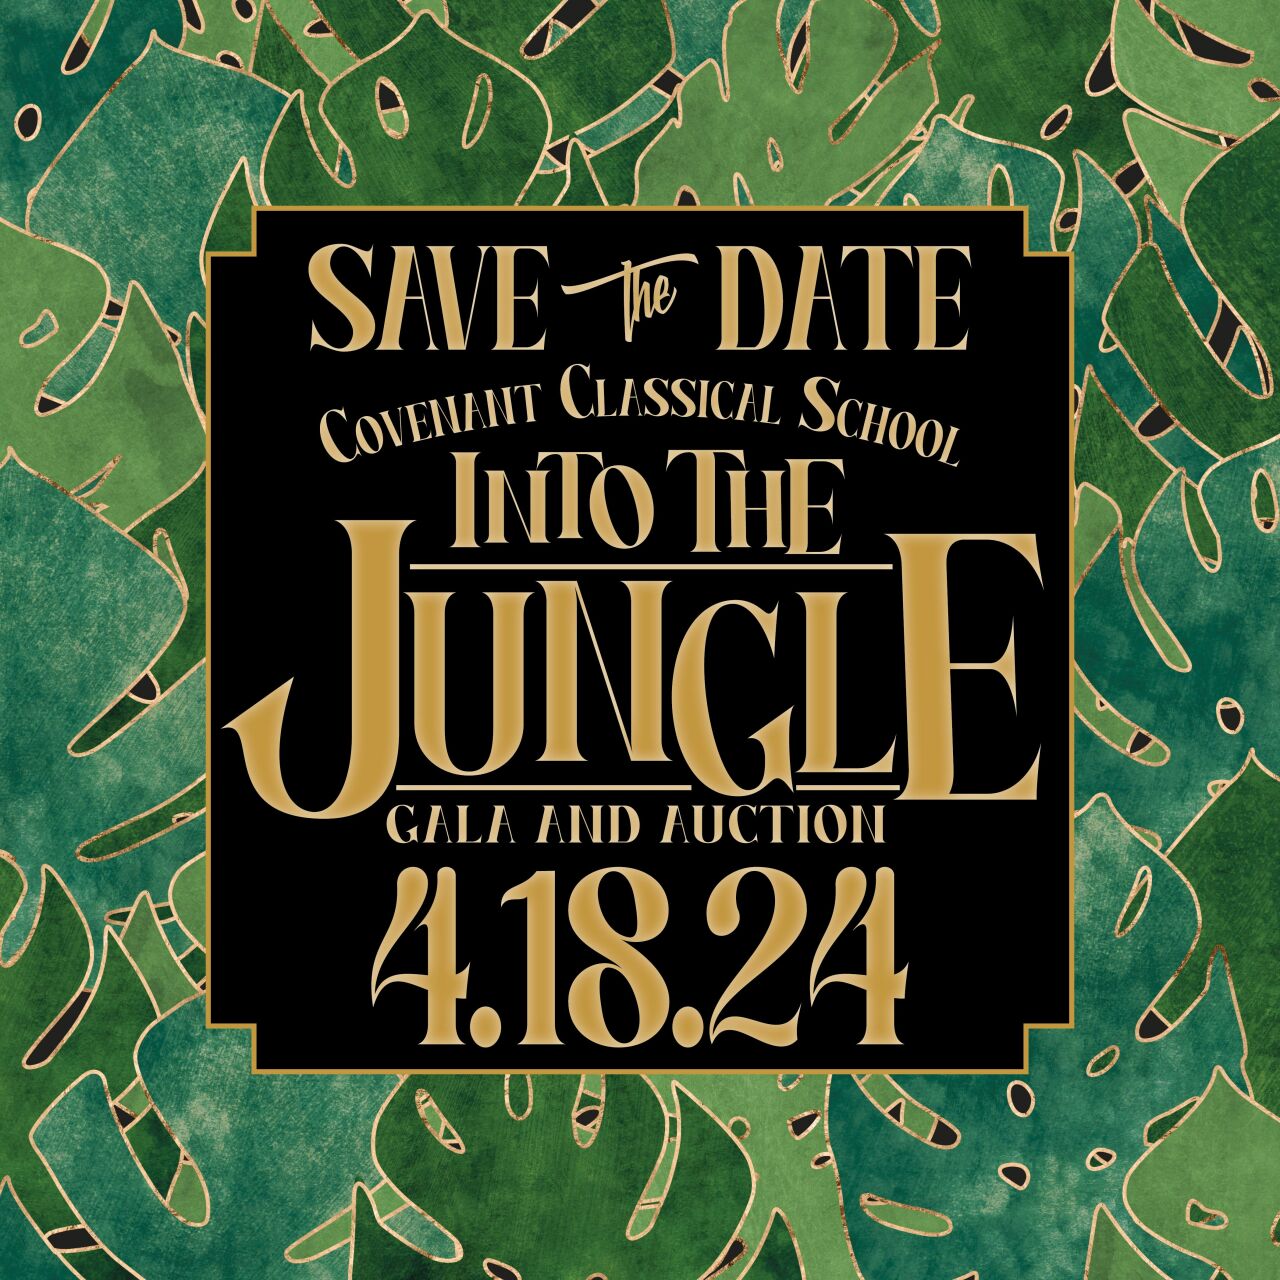 Ccs Auction 2024 Jungle Book Save The Date New Image